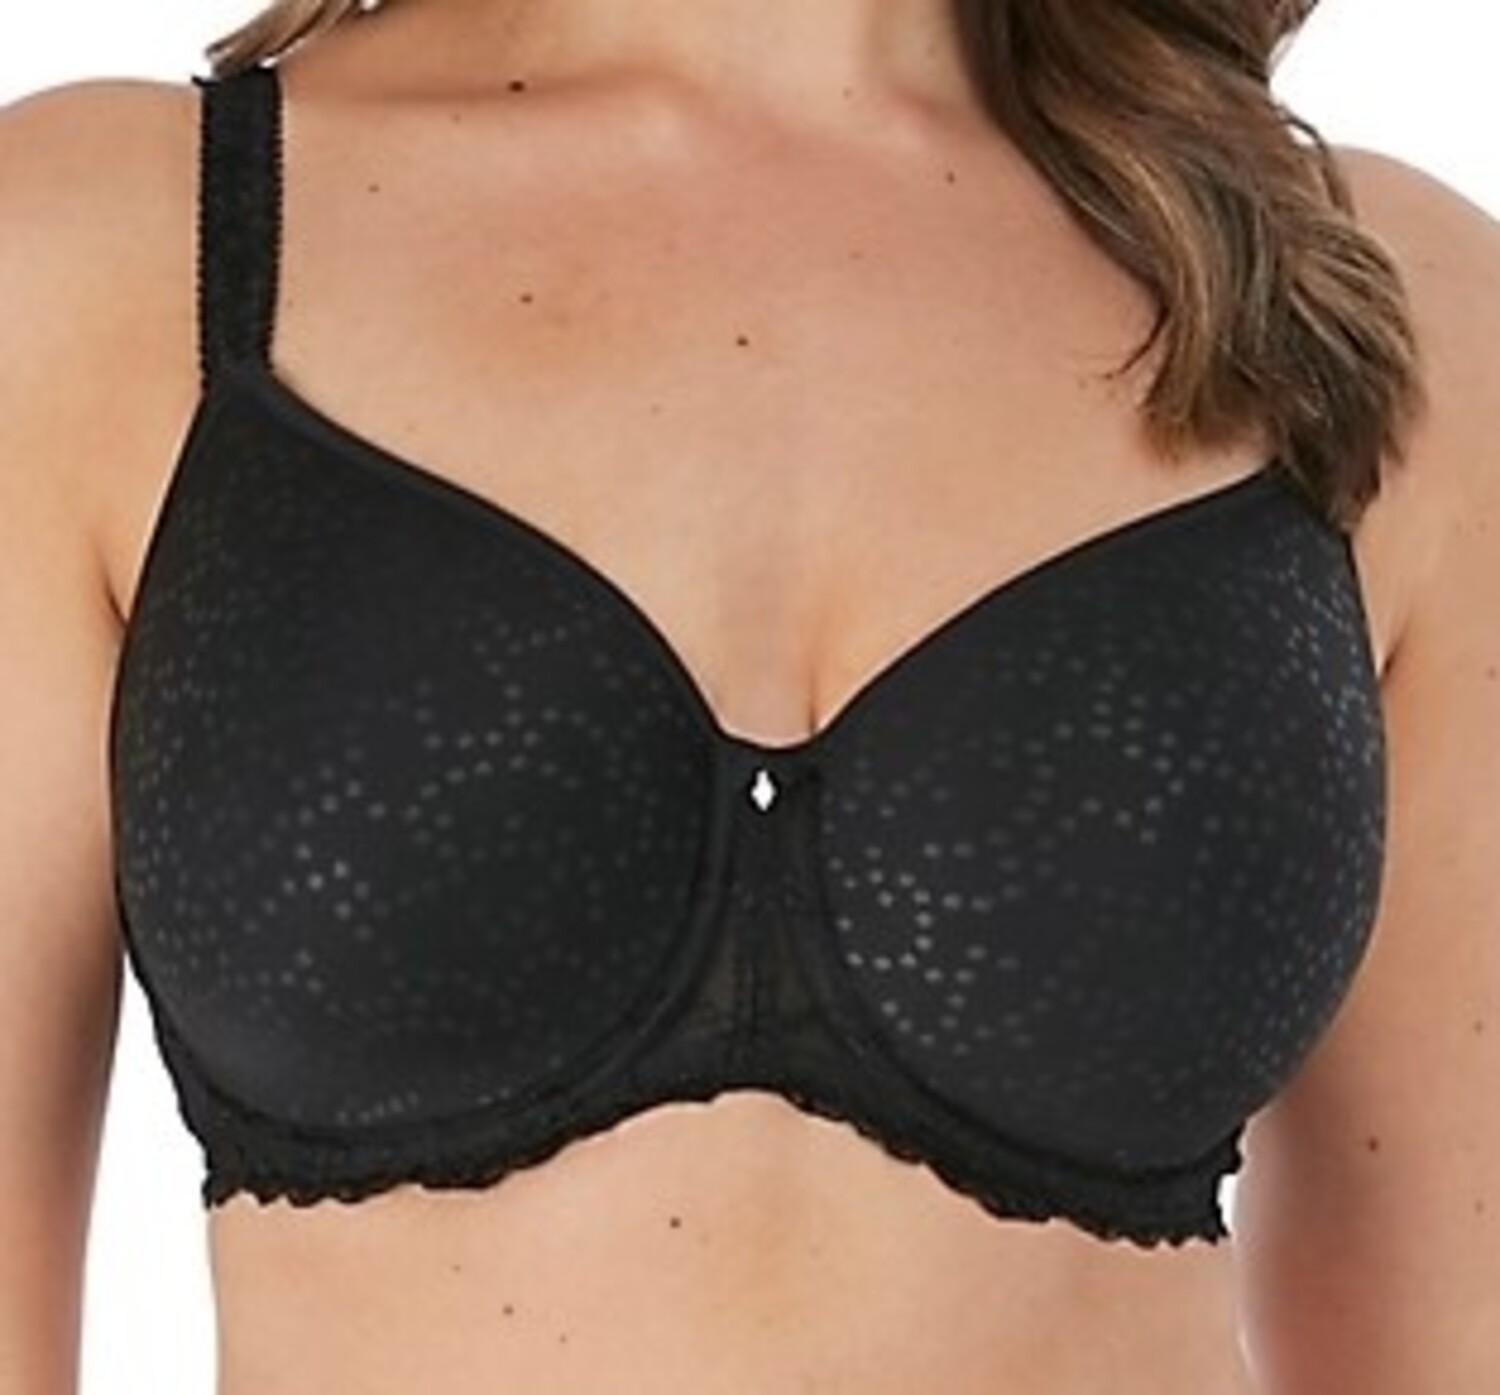 Push-up bra, satin, bow, light pattern, A to G-cup